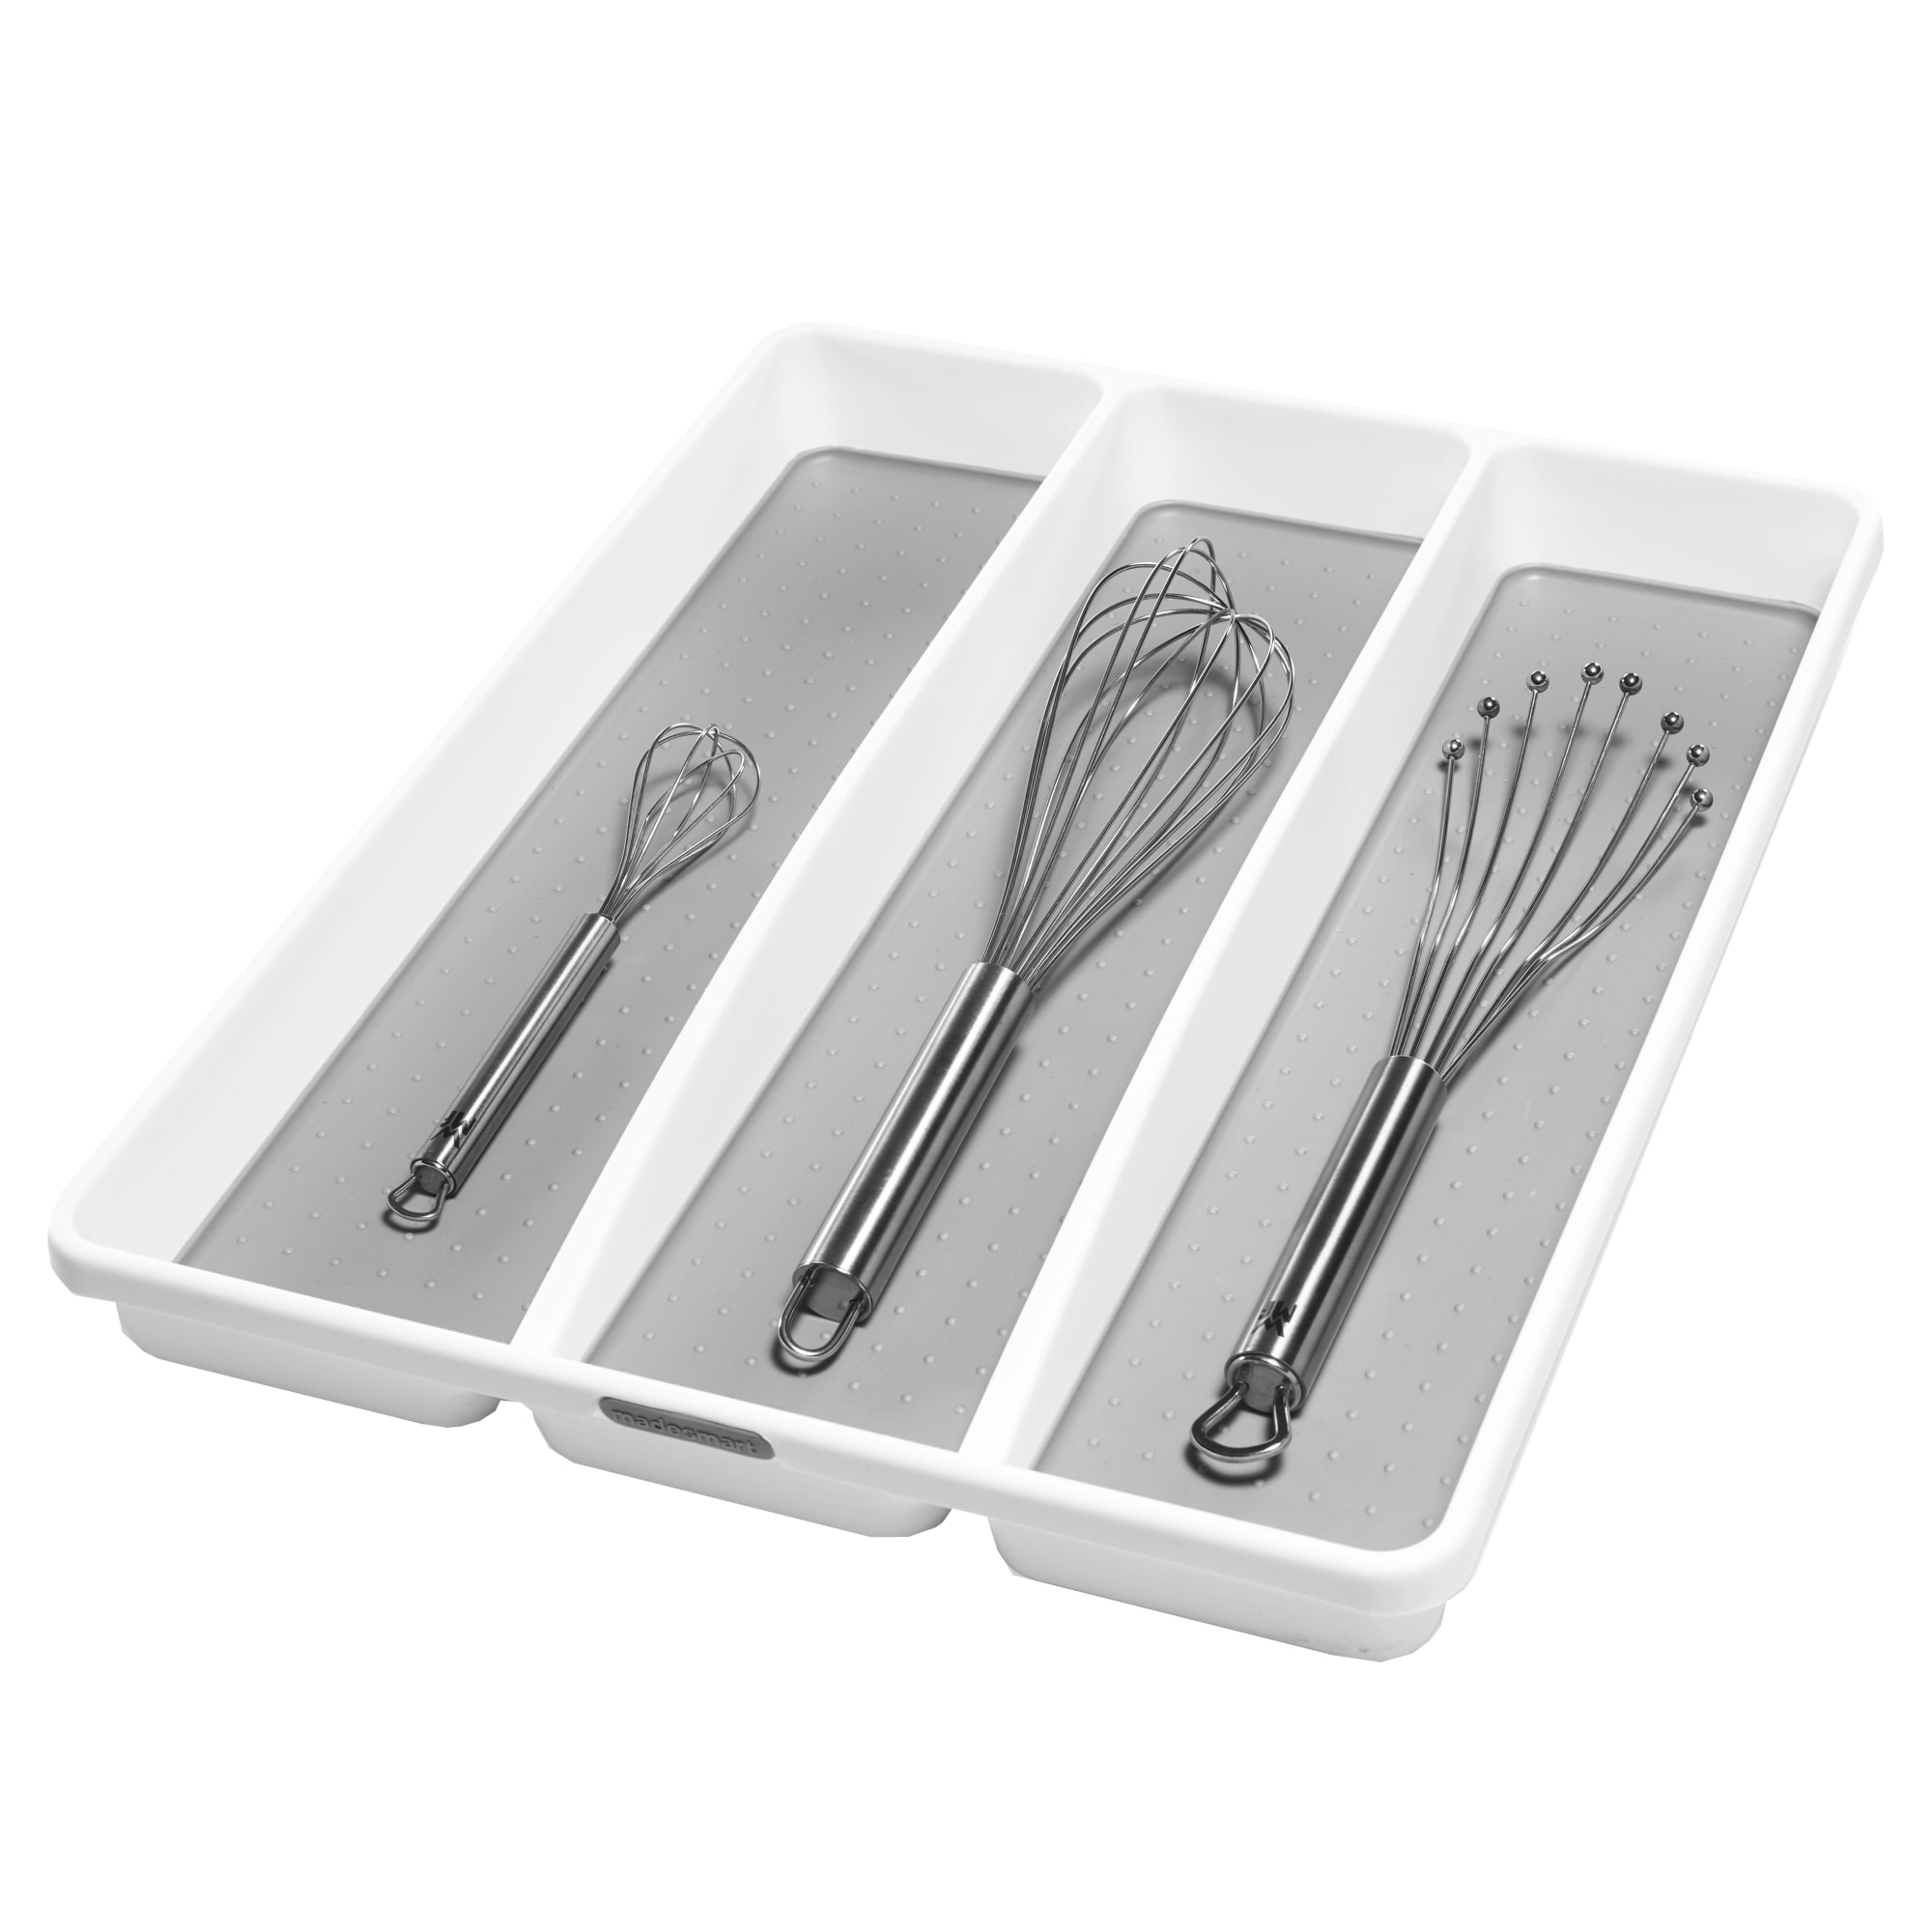 Madesmart Utensil Tray 3 Compartment White Image 2